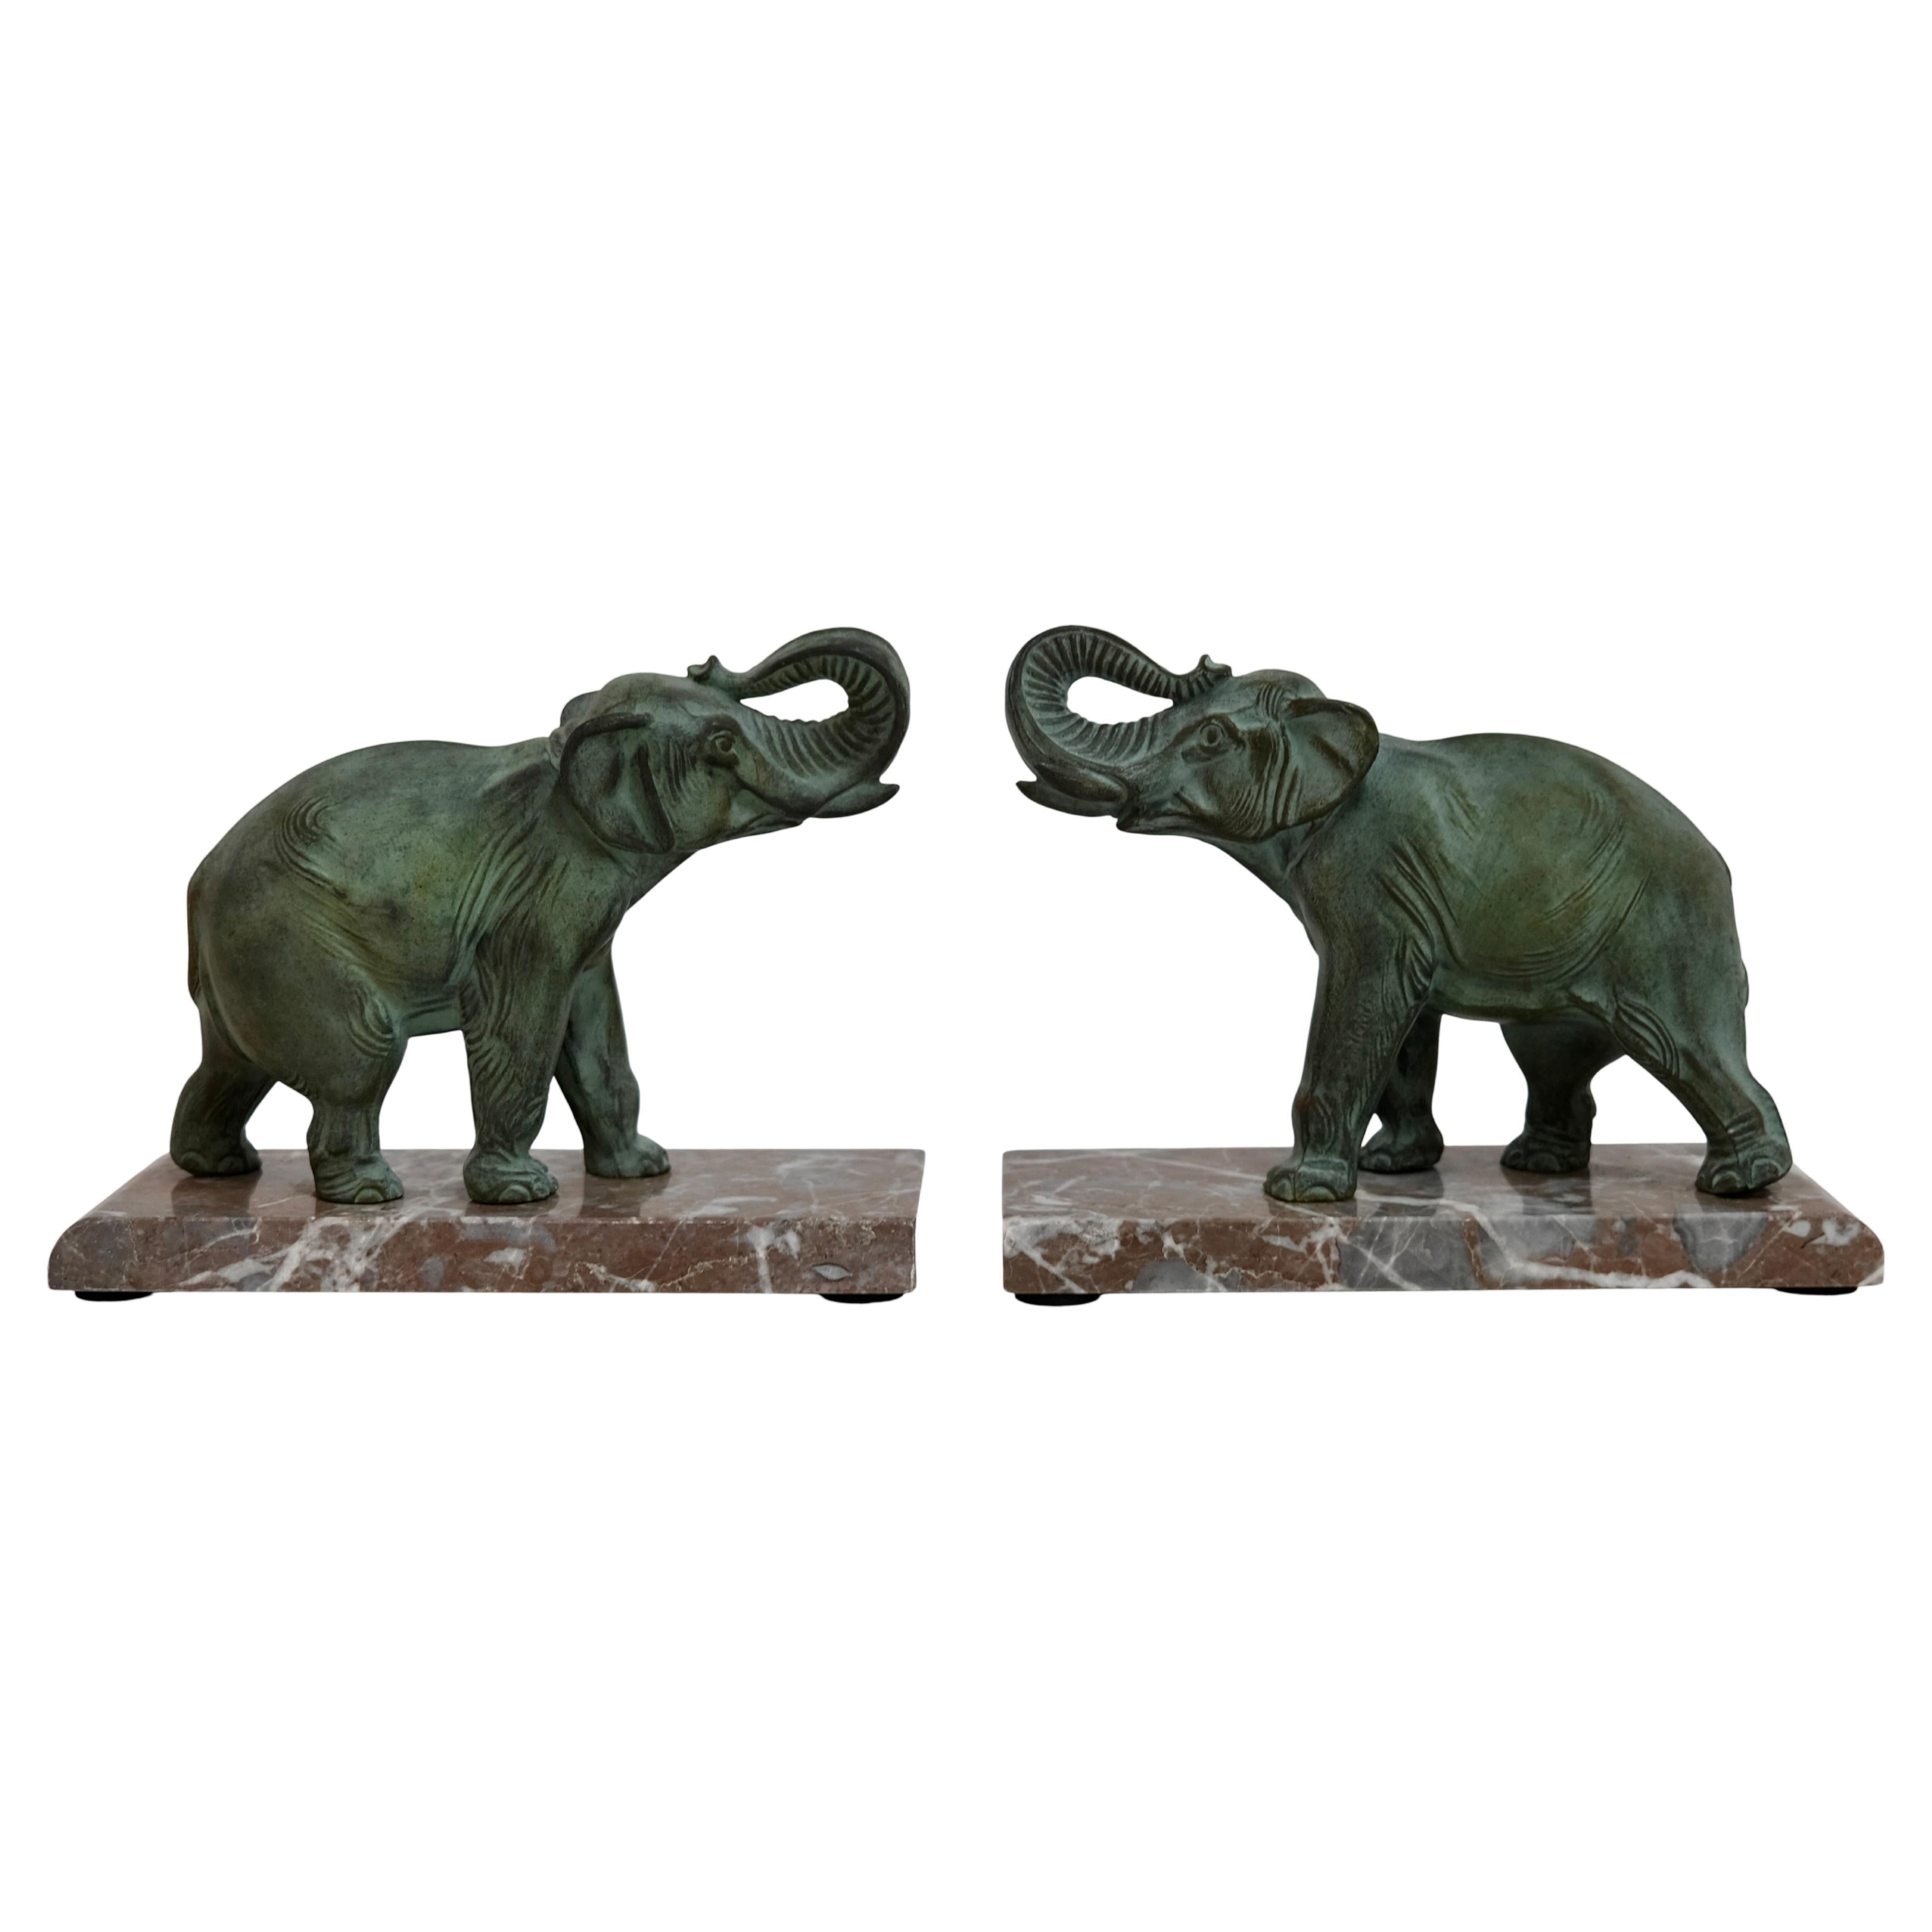 Art Deco Elephant Bookends with Raised Trunk